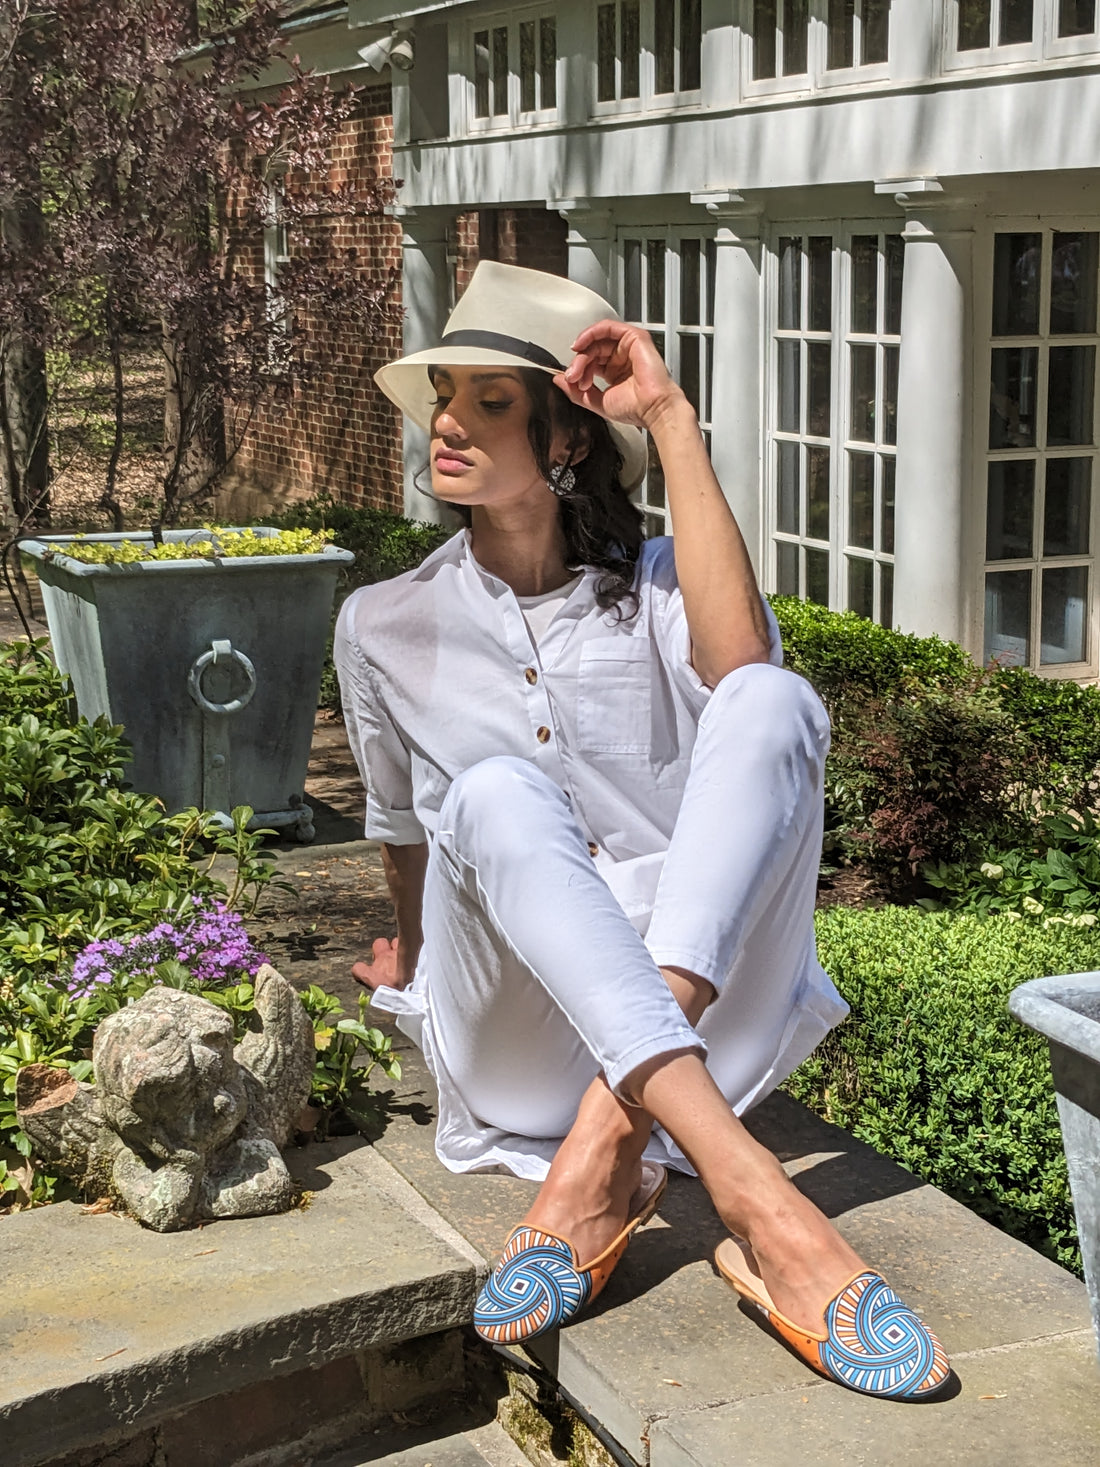 Embrace Summer Style: Adding a Splash of Color with Colorful Loafers or Mules